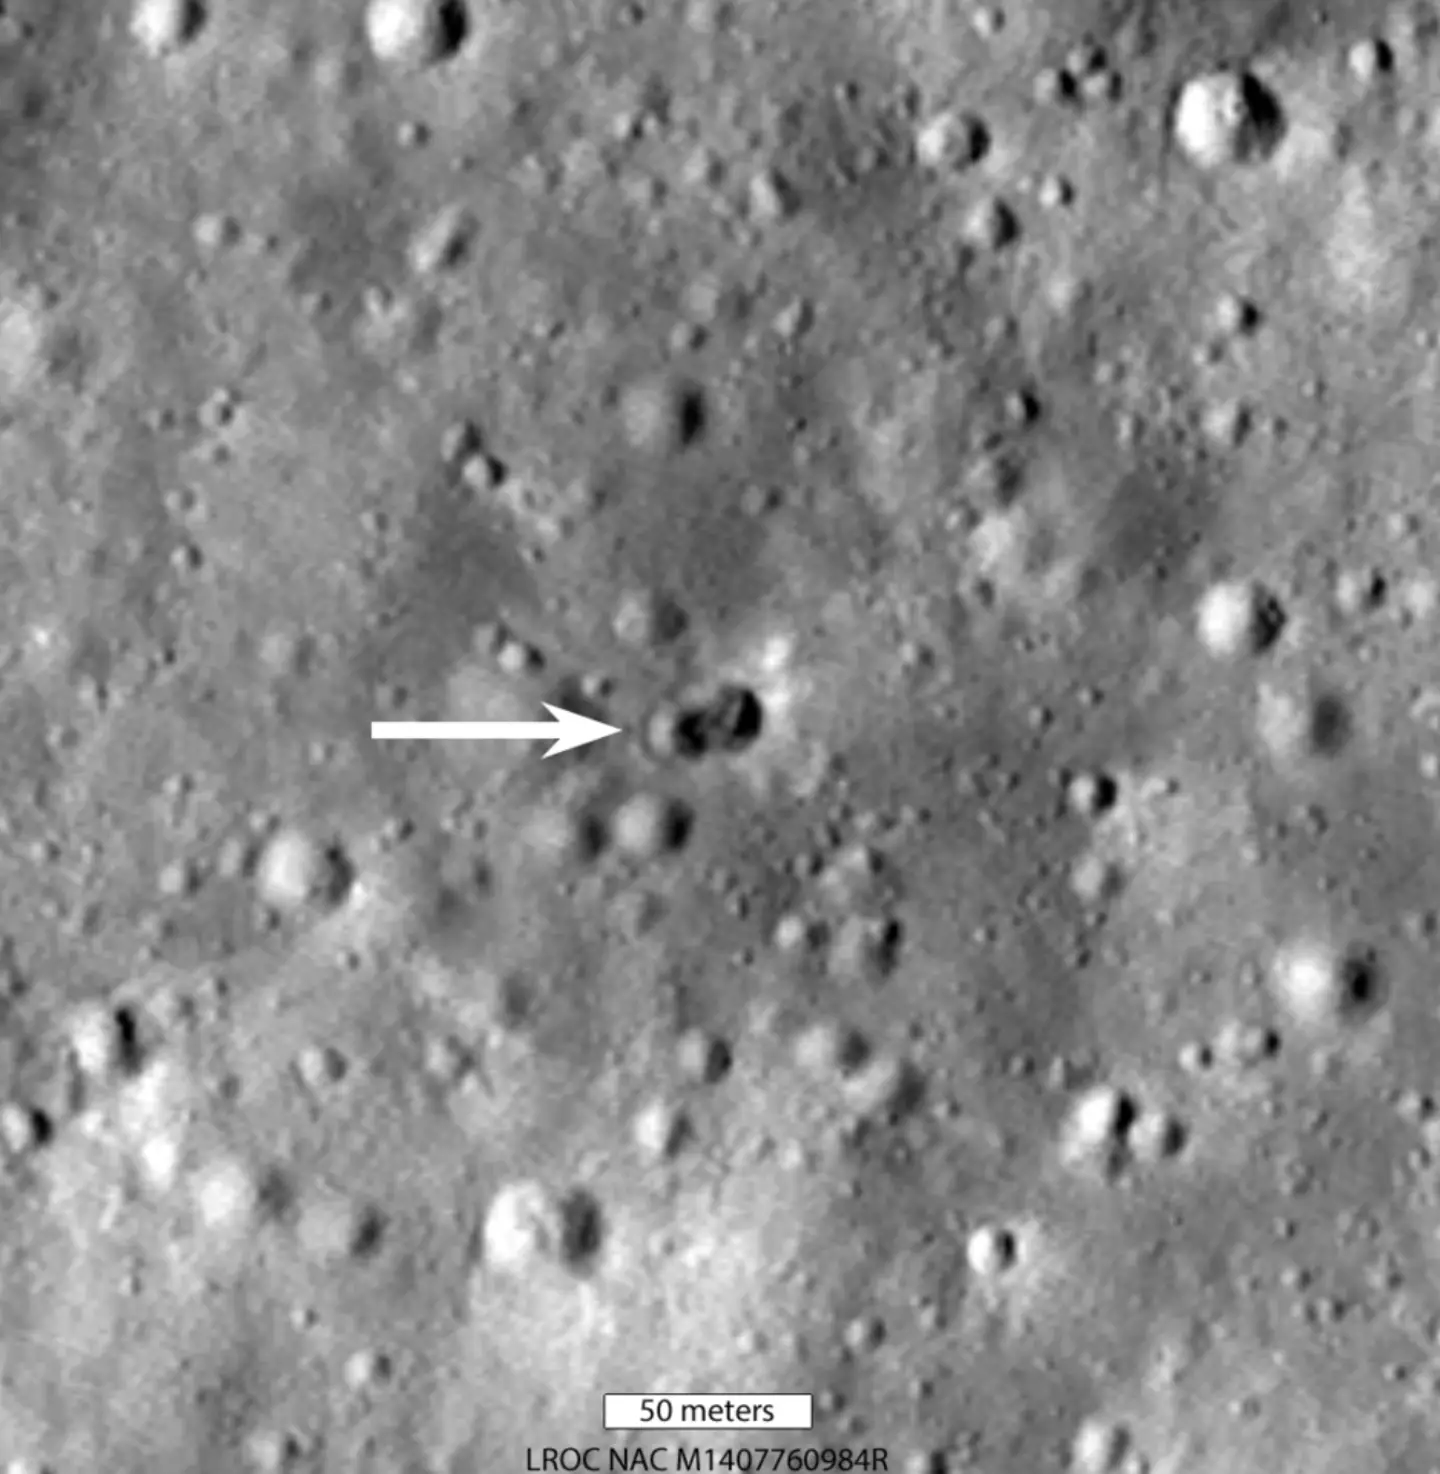 NASA has shared images of an unidentified spacecraft that has crashed into the moon.